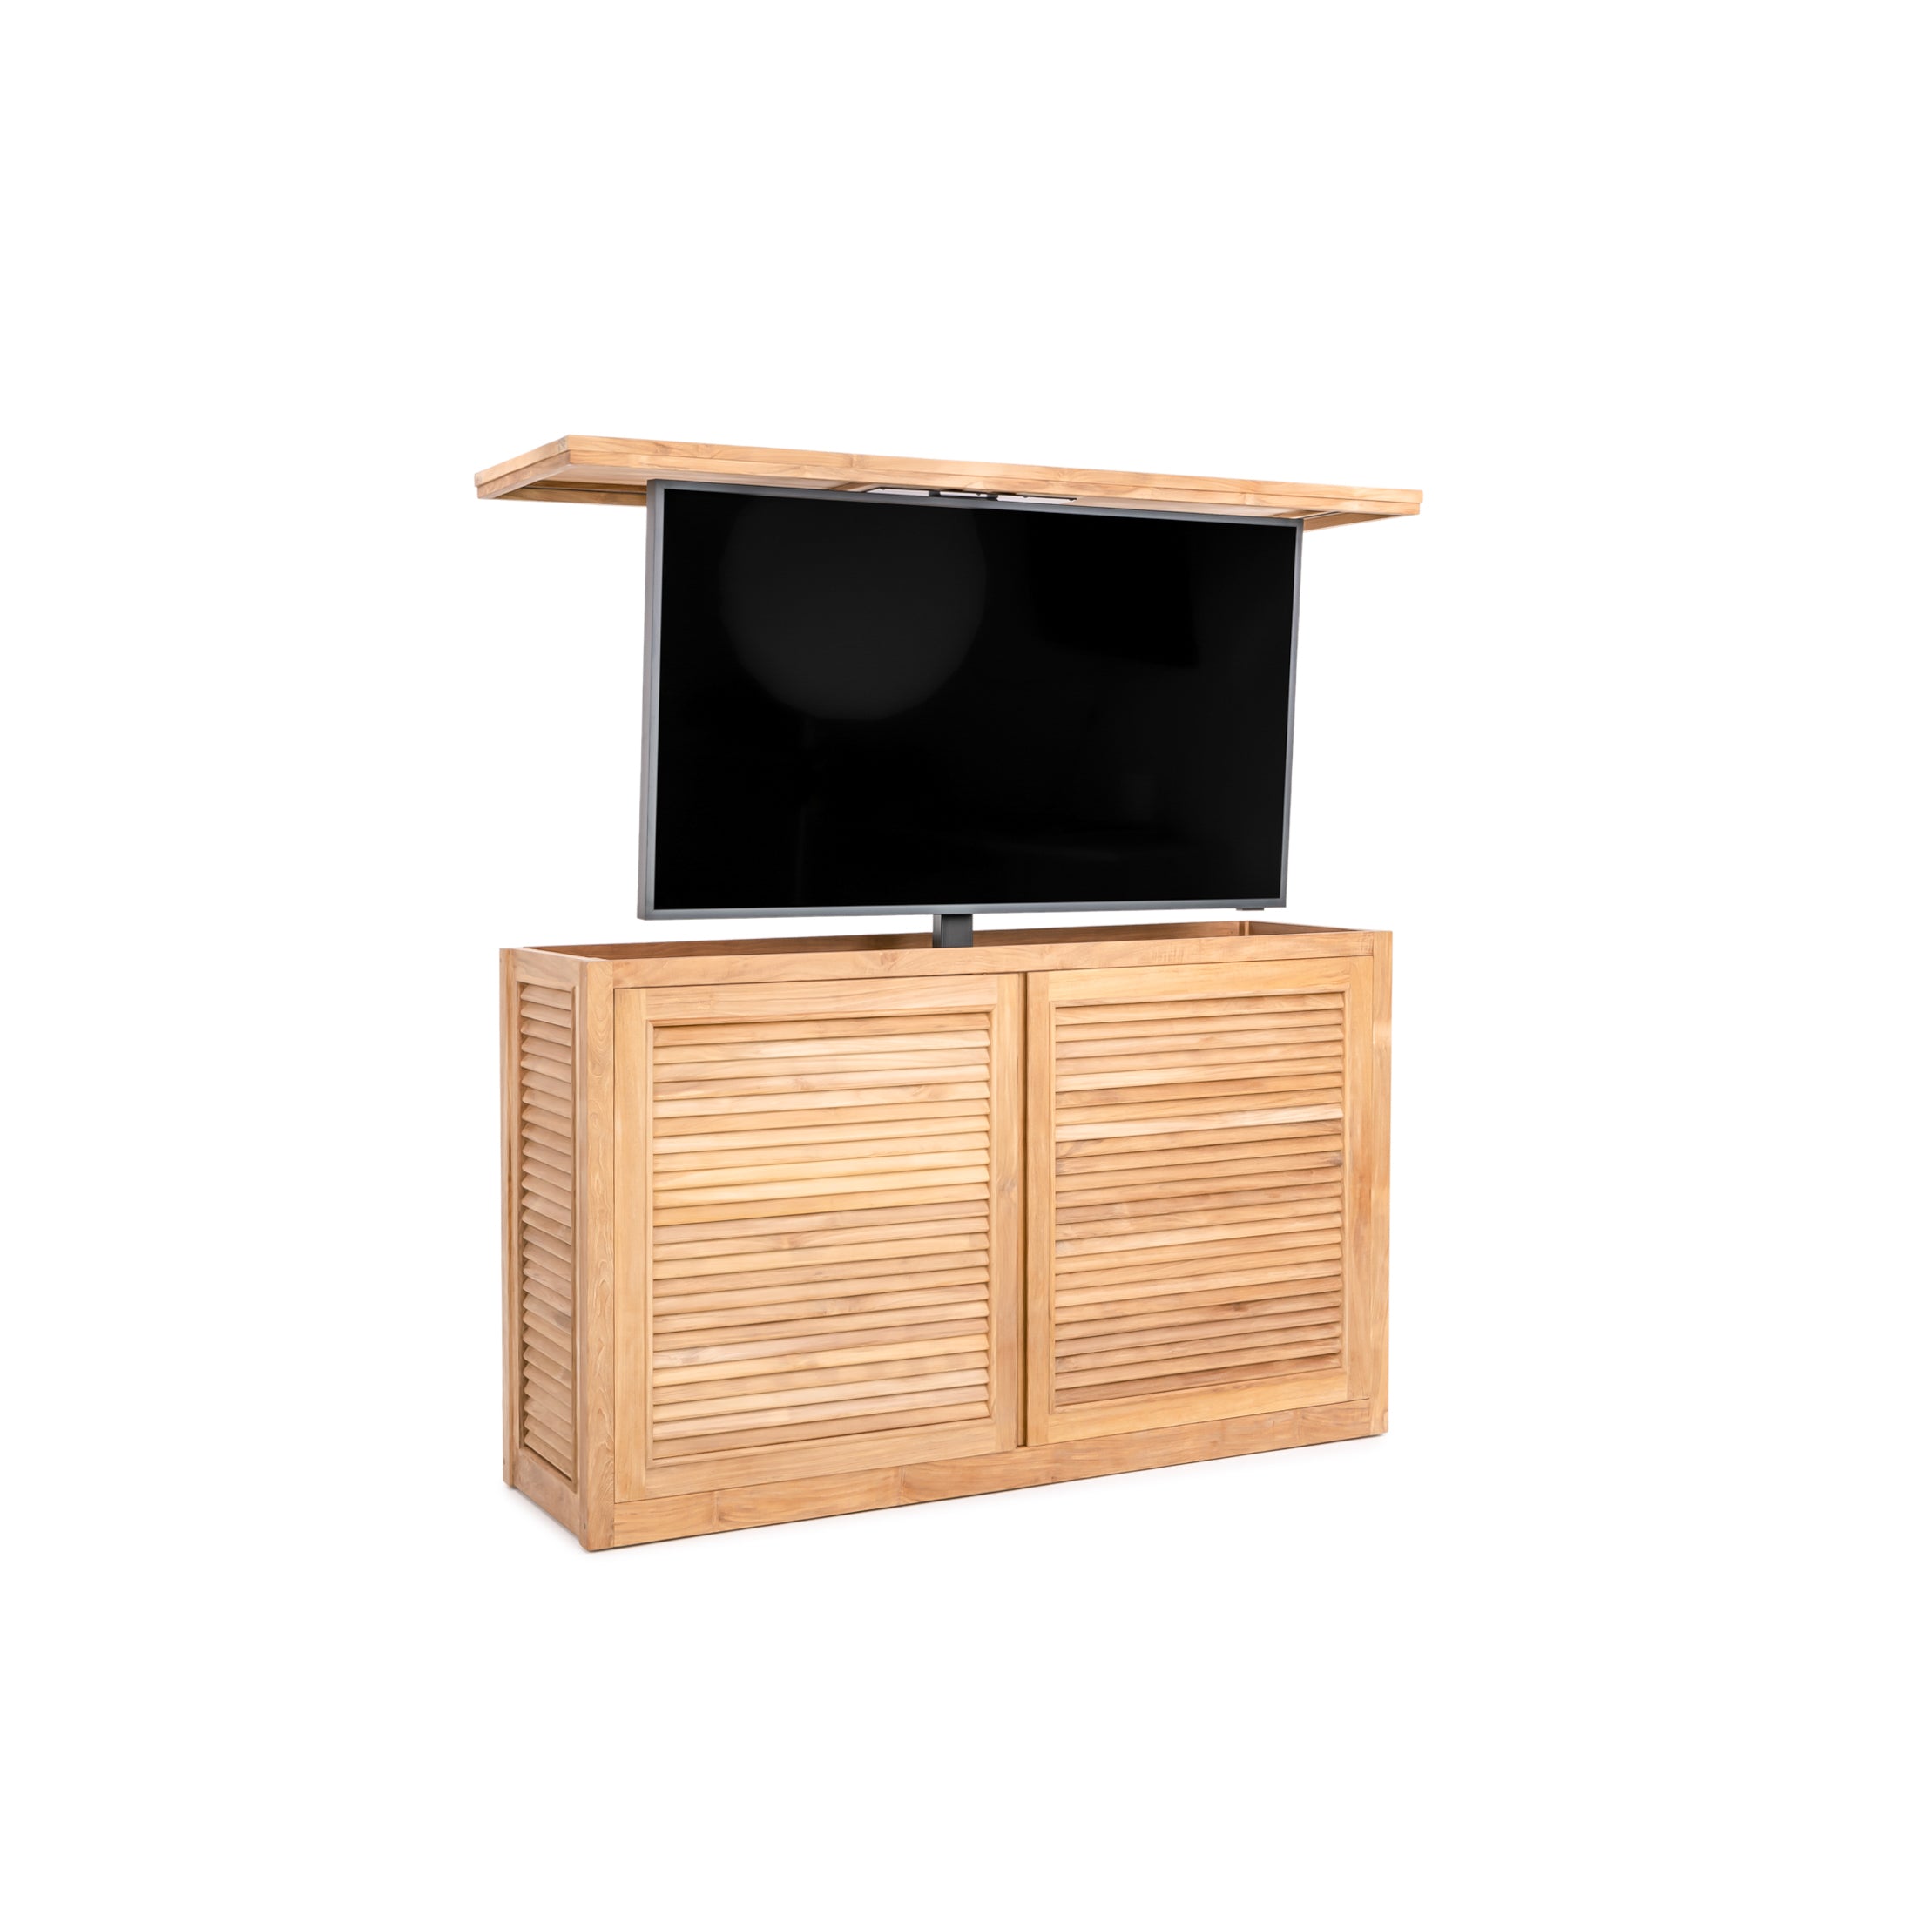 Relax TV Console (Motorized Lift)